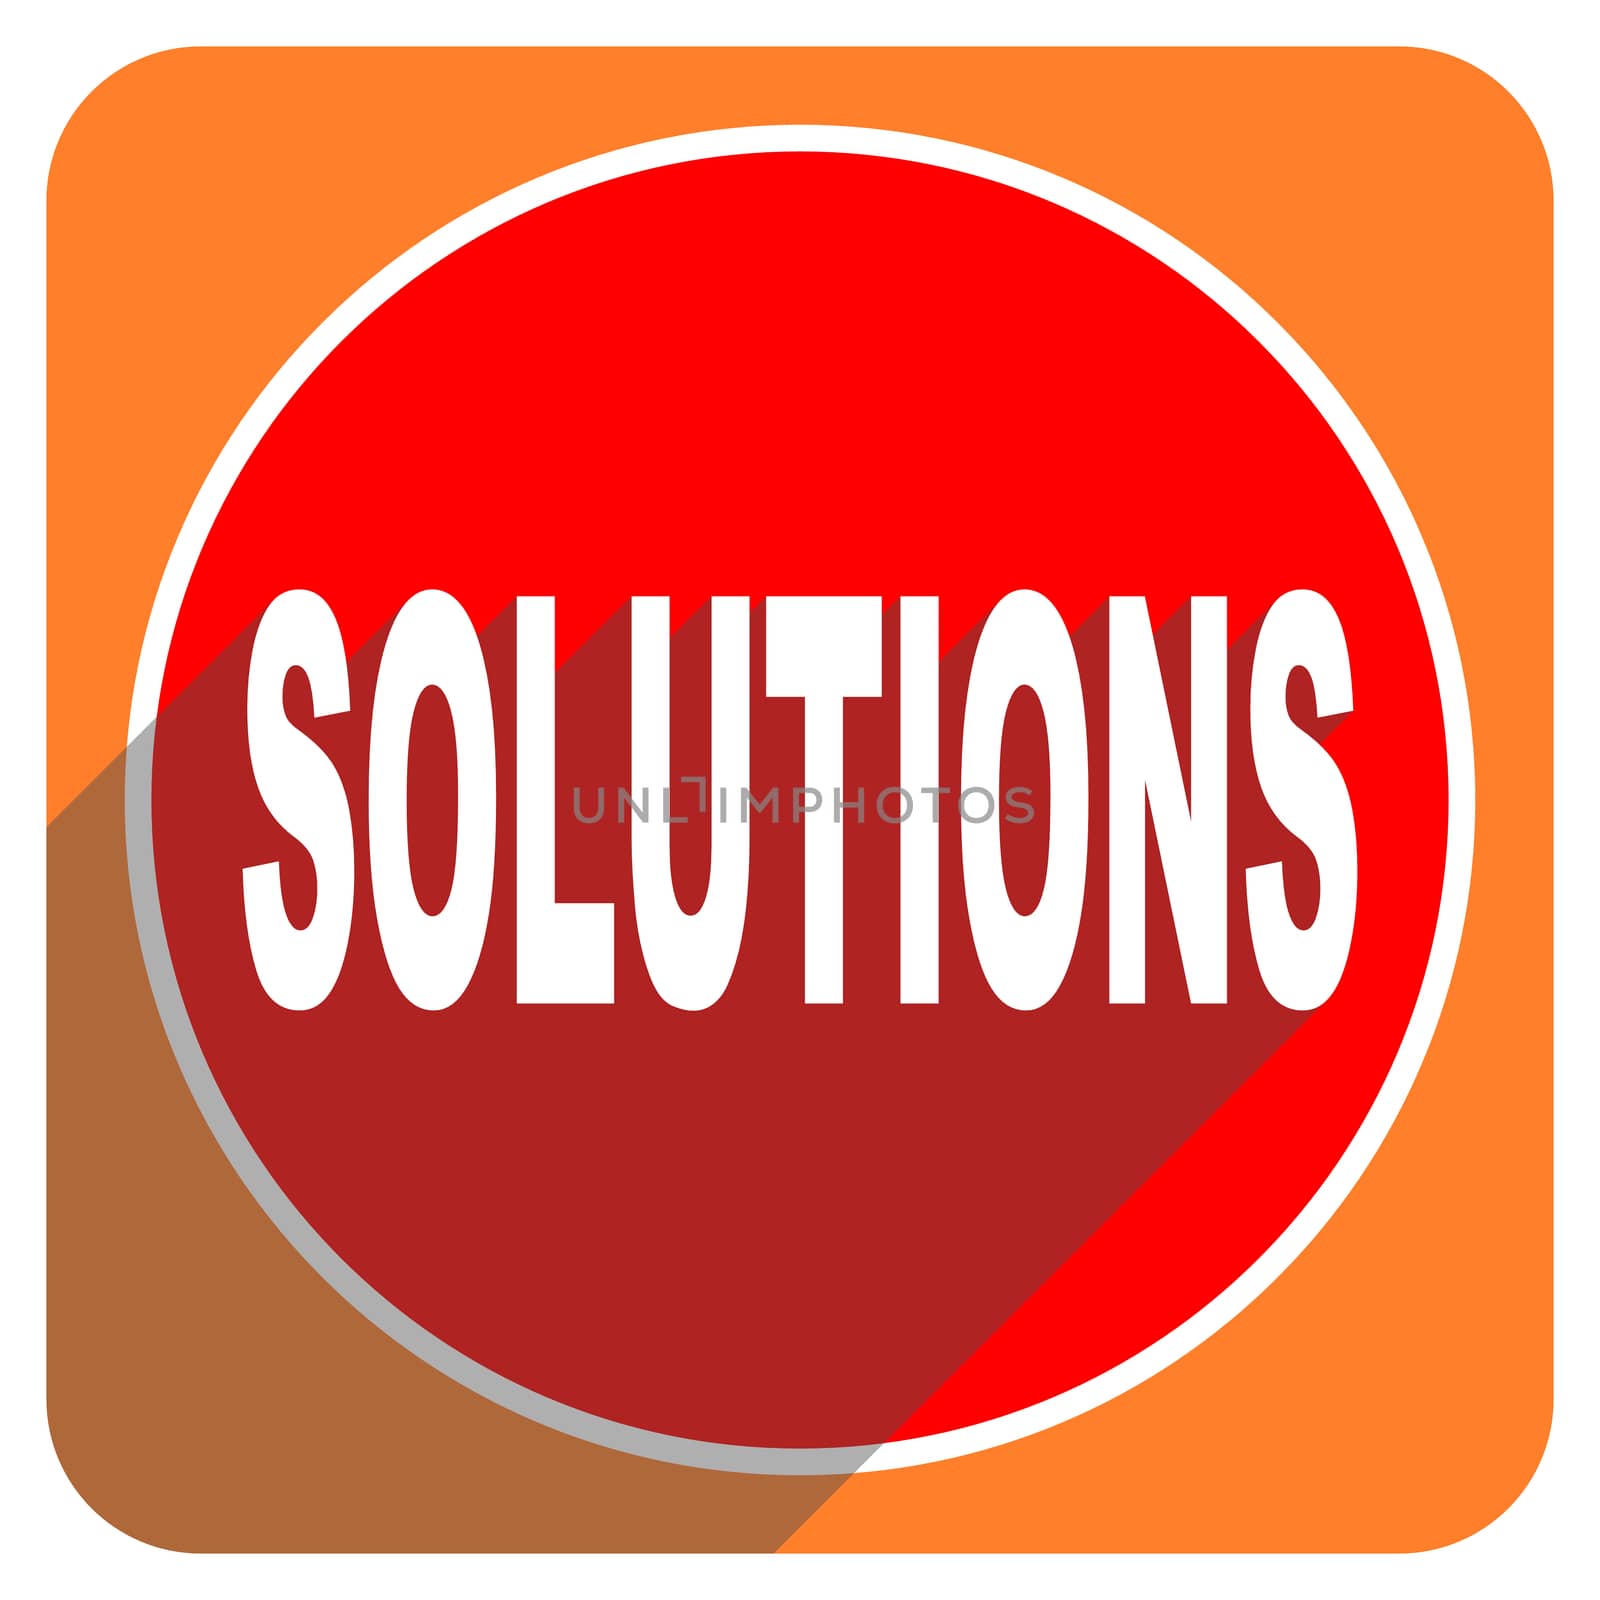 solutions red flat icon isolated